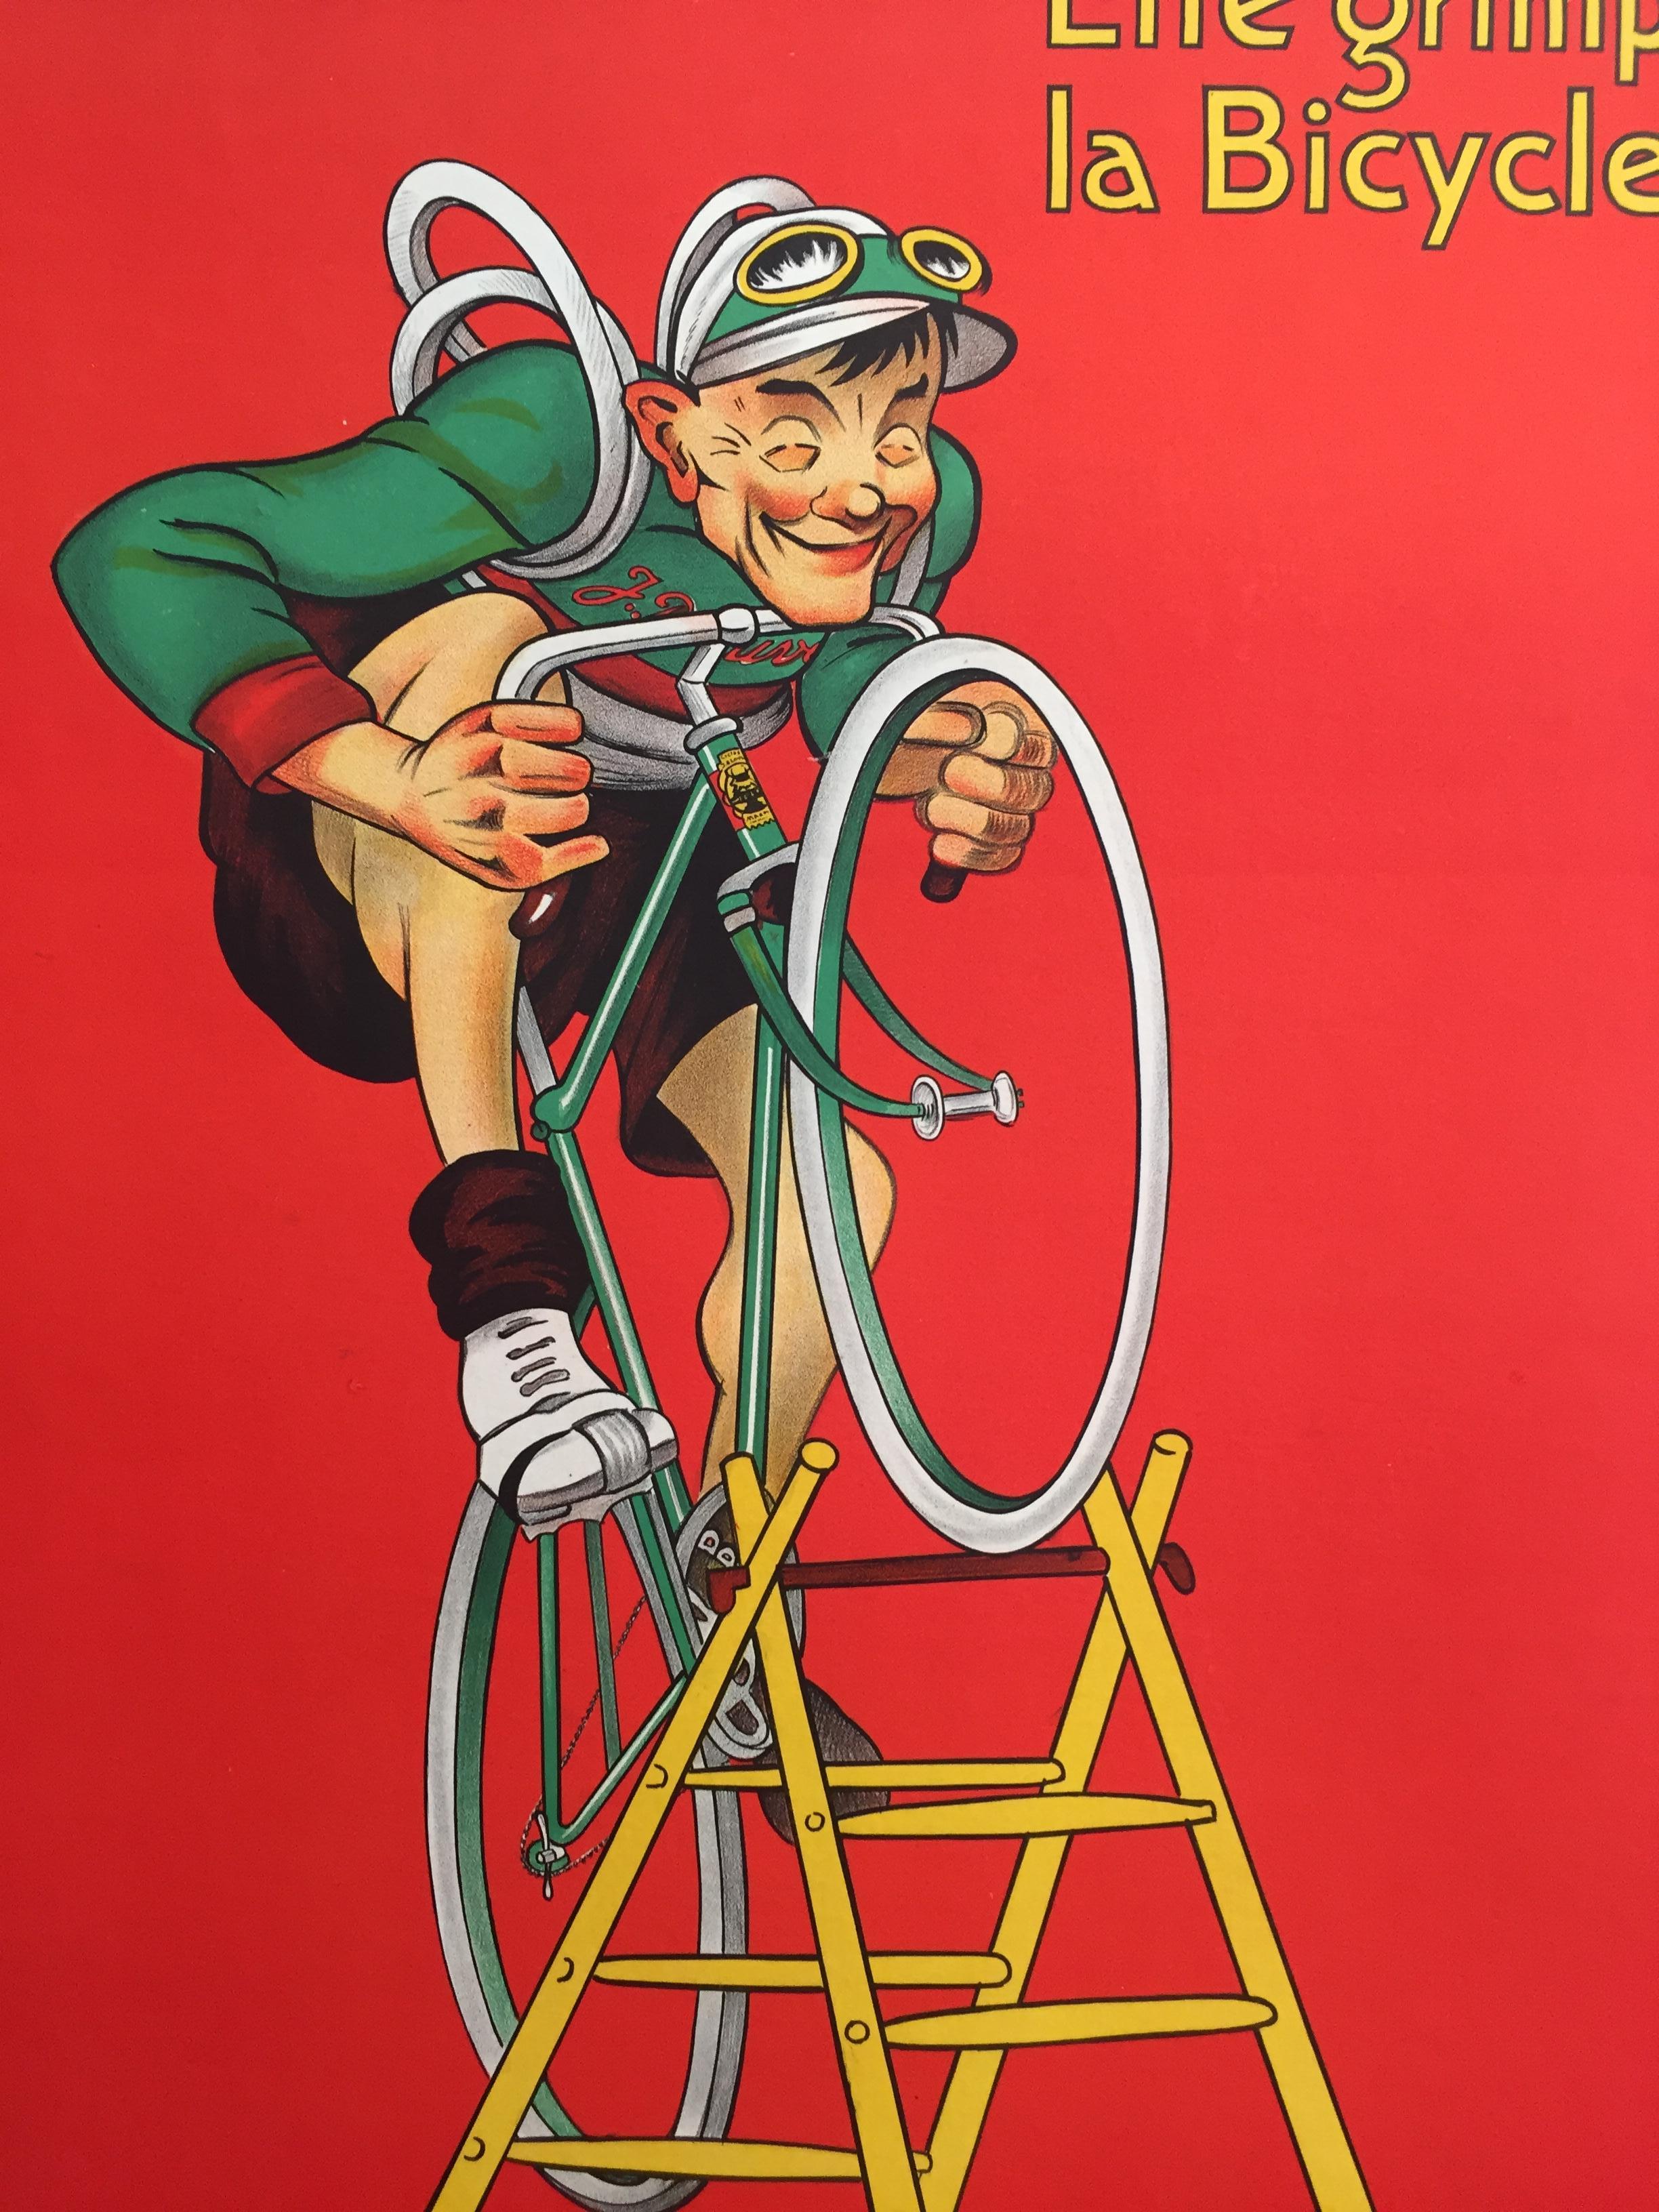 Art Nouveau Original Vintage French Cycling and Bicycle Poster J.B. Louvet by Mich, 1919  